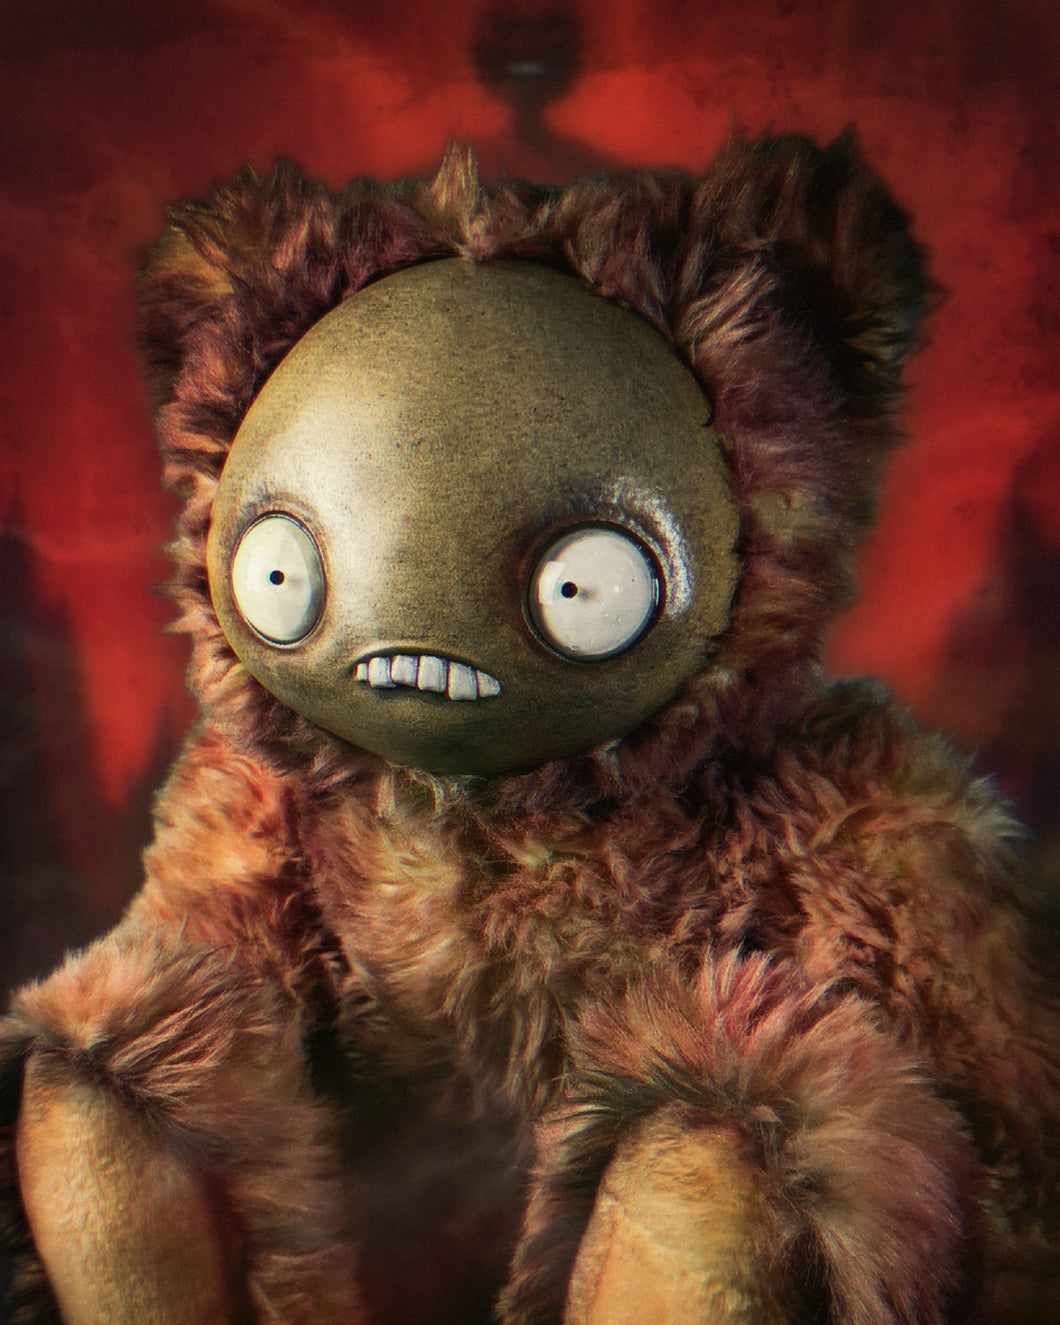 Bleeding Psychosis: JITTERS - CRYPTCRITZ Handcrafted Creepy Monster Art Doll Plush Toy for Unhinged Individuals